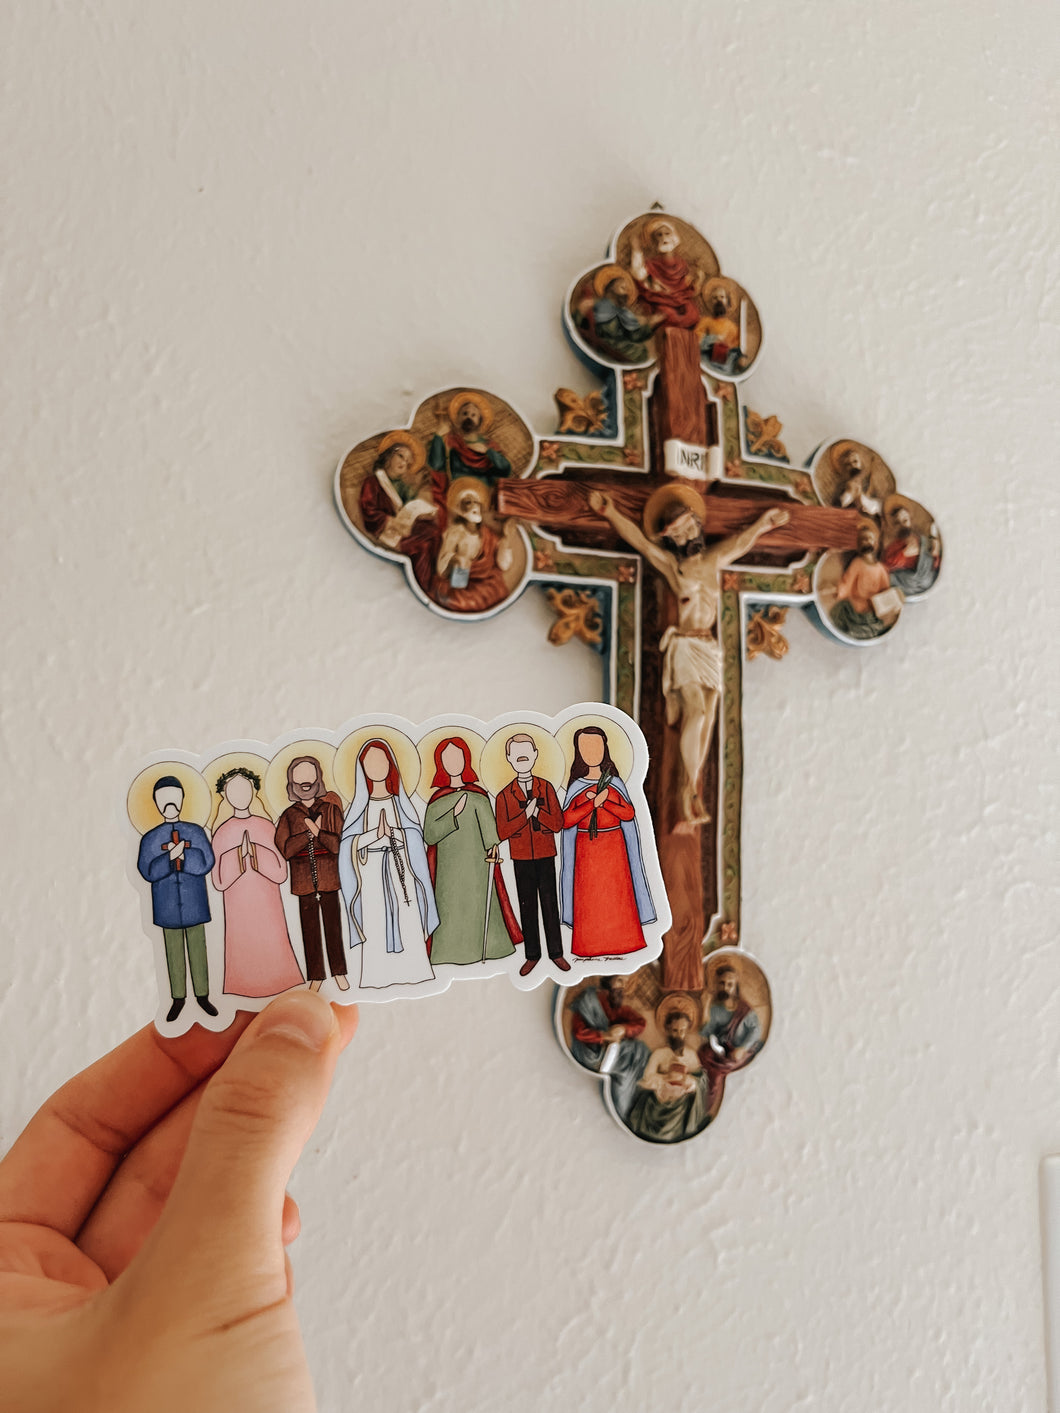 A Cloud of Witnesses for Mental Health Sticker